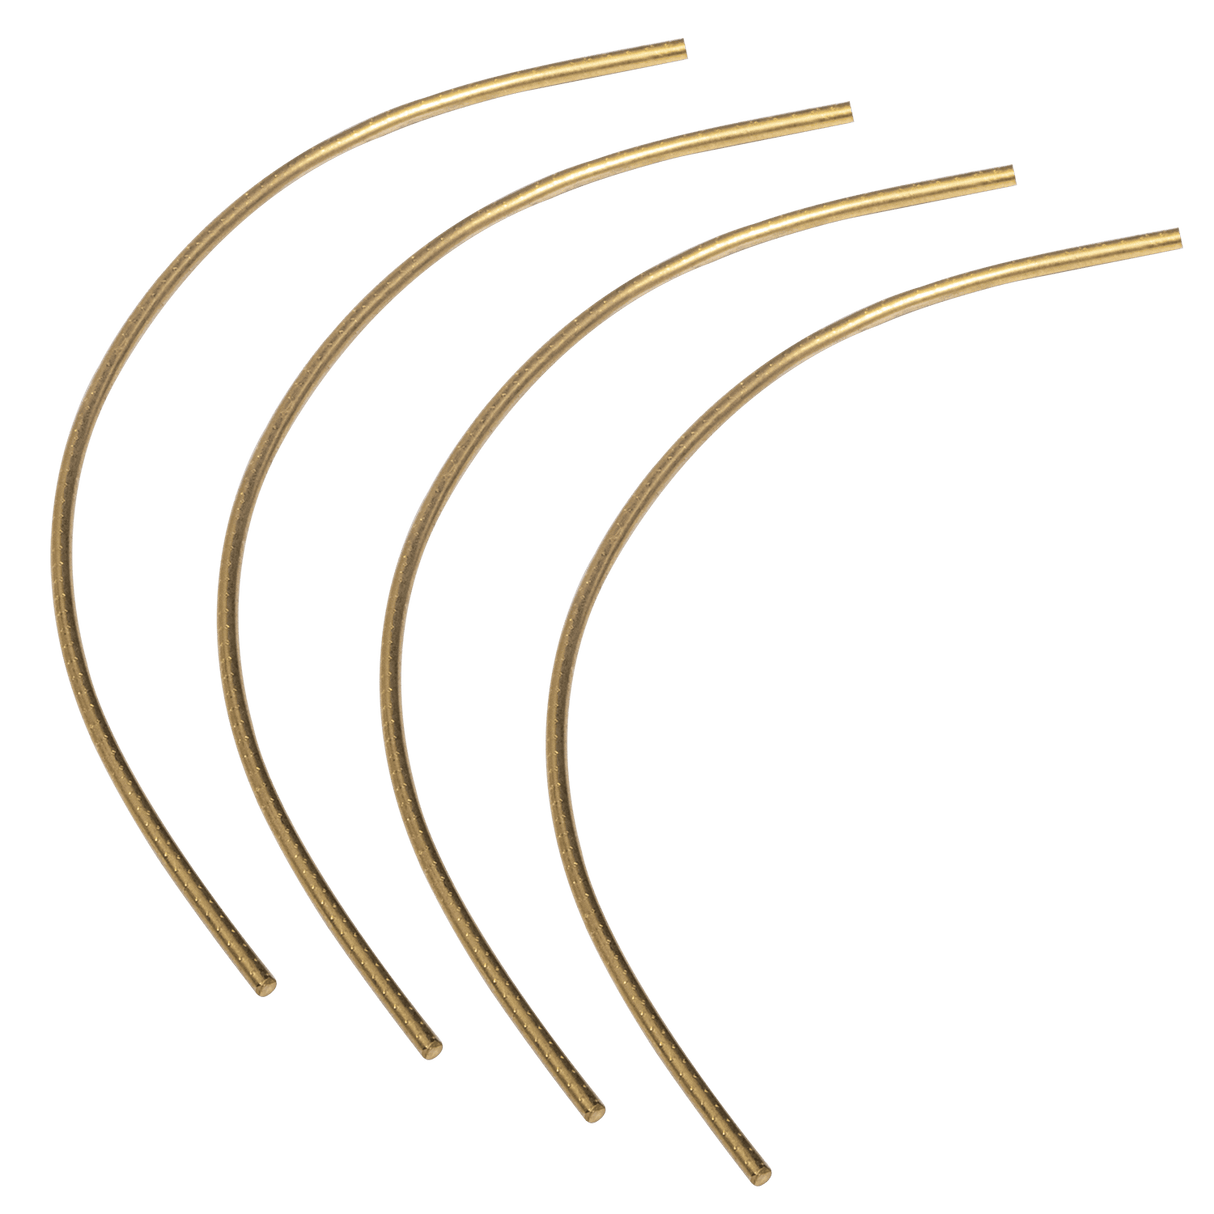 AudioQuest Bare Naked BiWire Jumpers - BWJUMPERS-G Gold